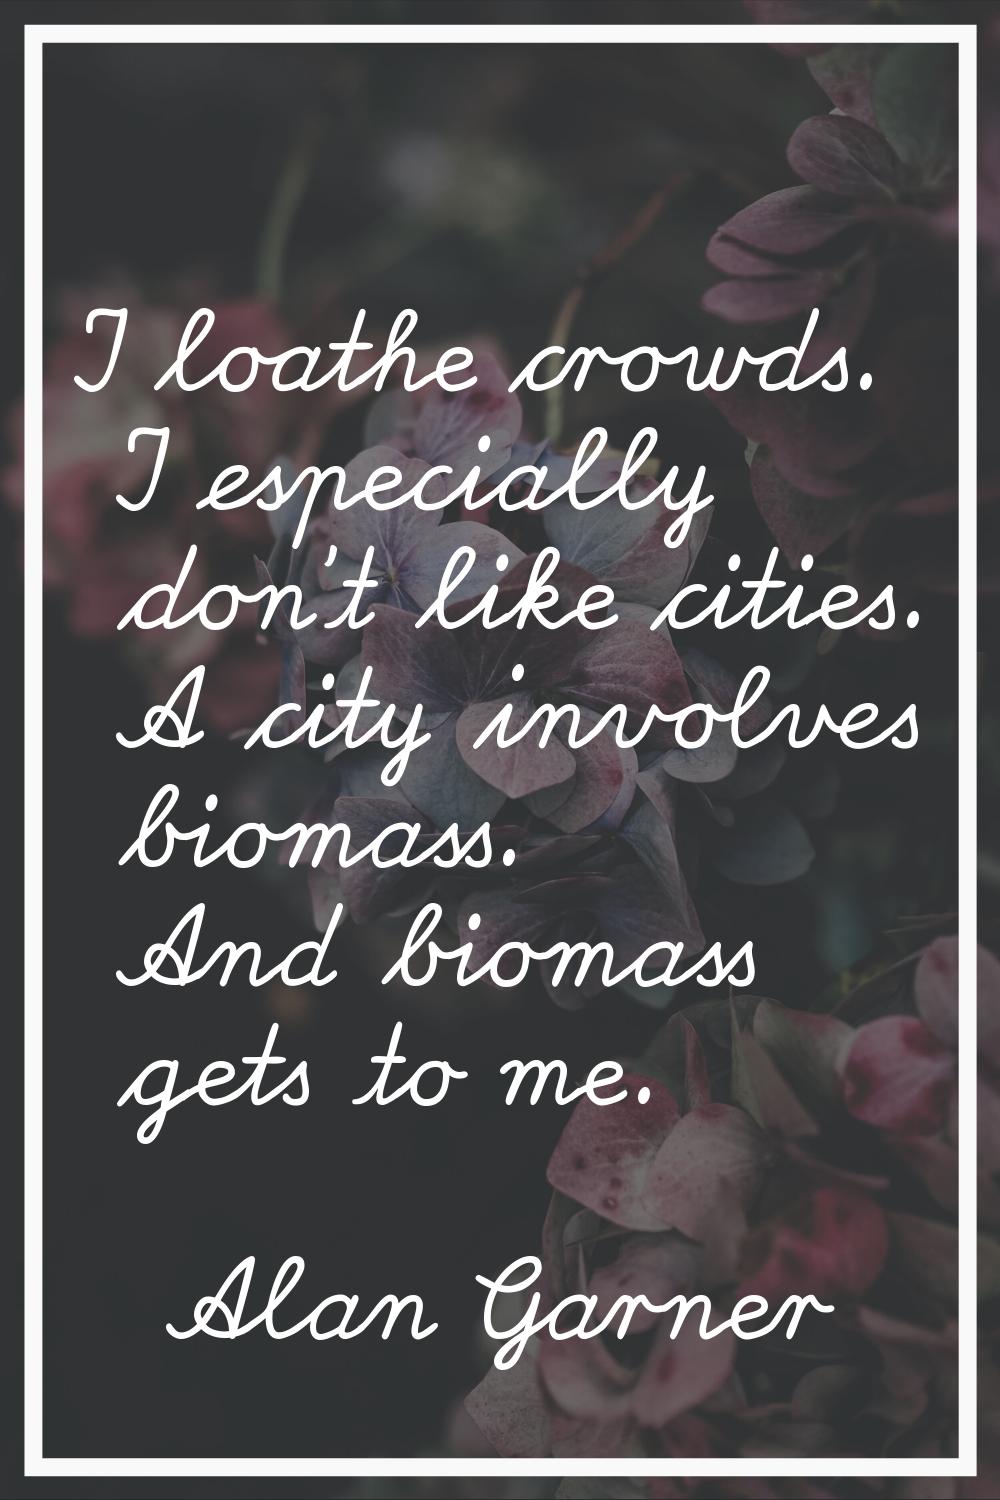 I loathe crowds. I especially don't like cities. A city involves biomass. And biomass gets to me.